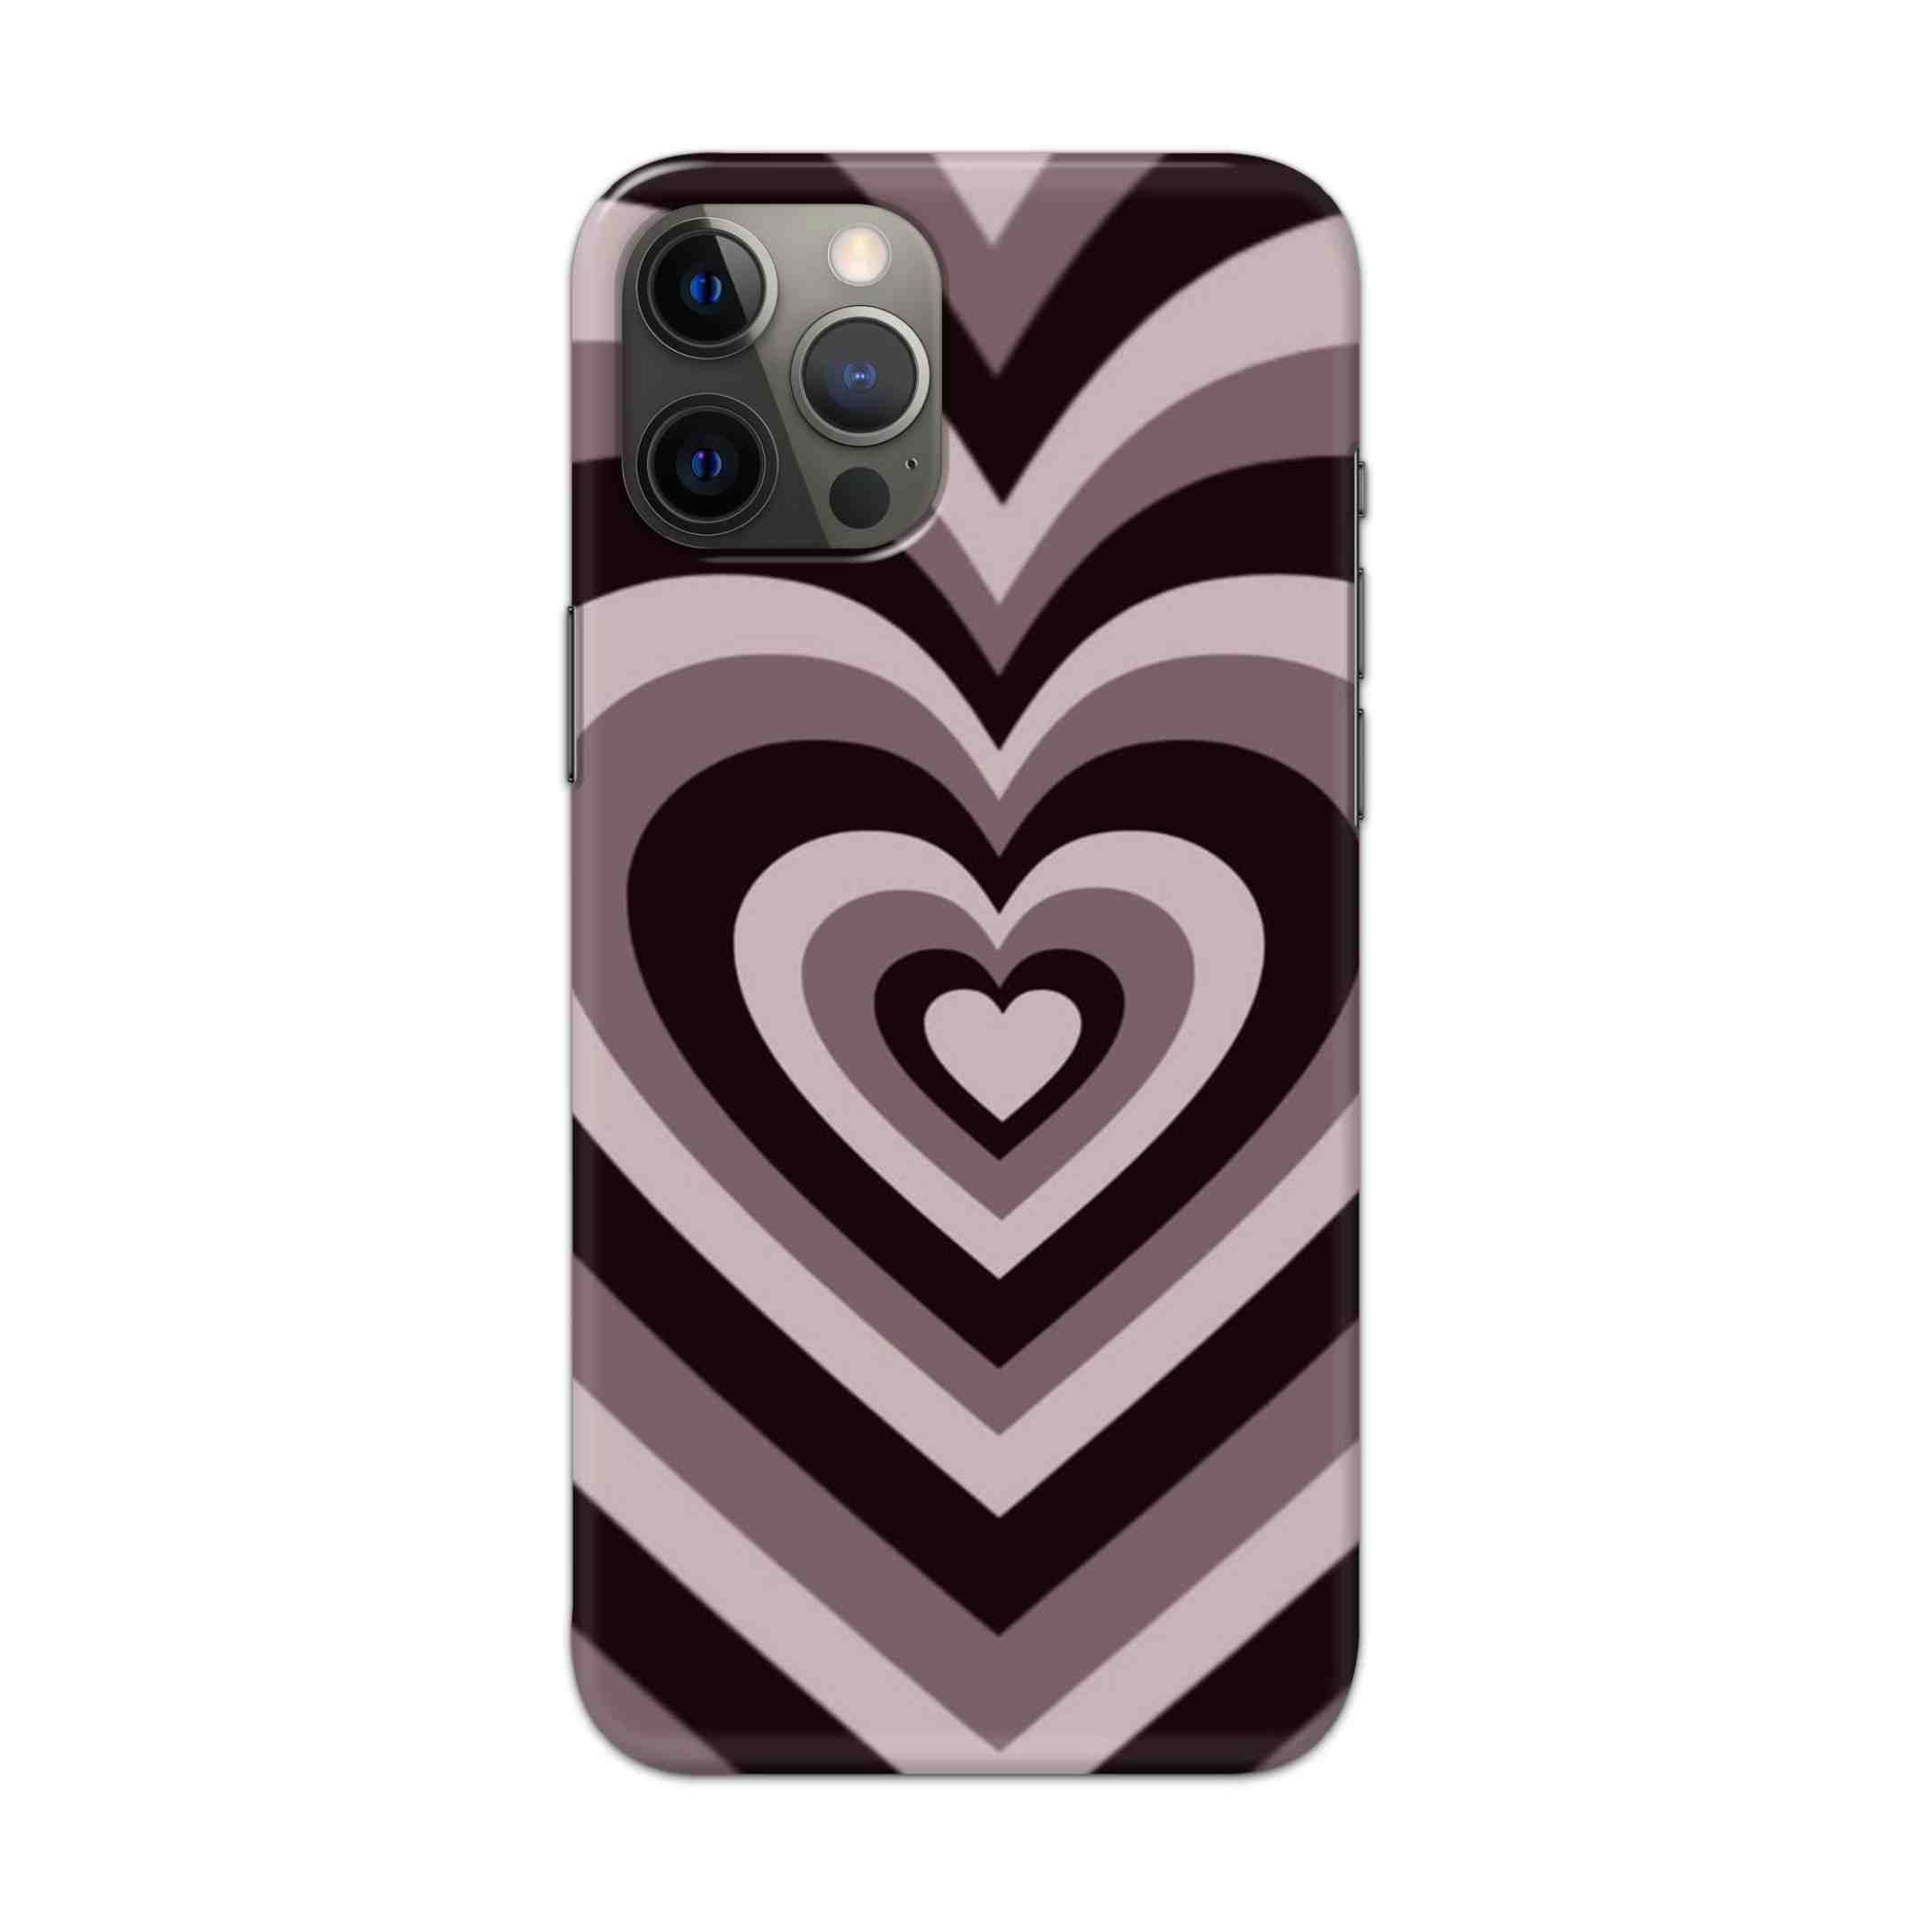 Buy Black Brown Heart Hard Back Mobile Phone Case Cover For Apple iPhone 12 pro Online